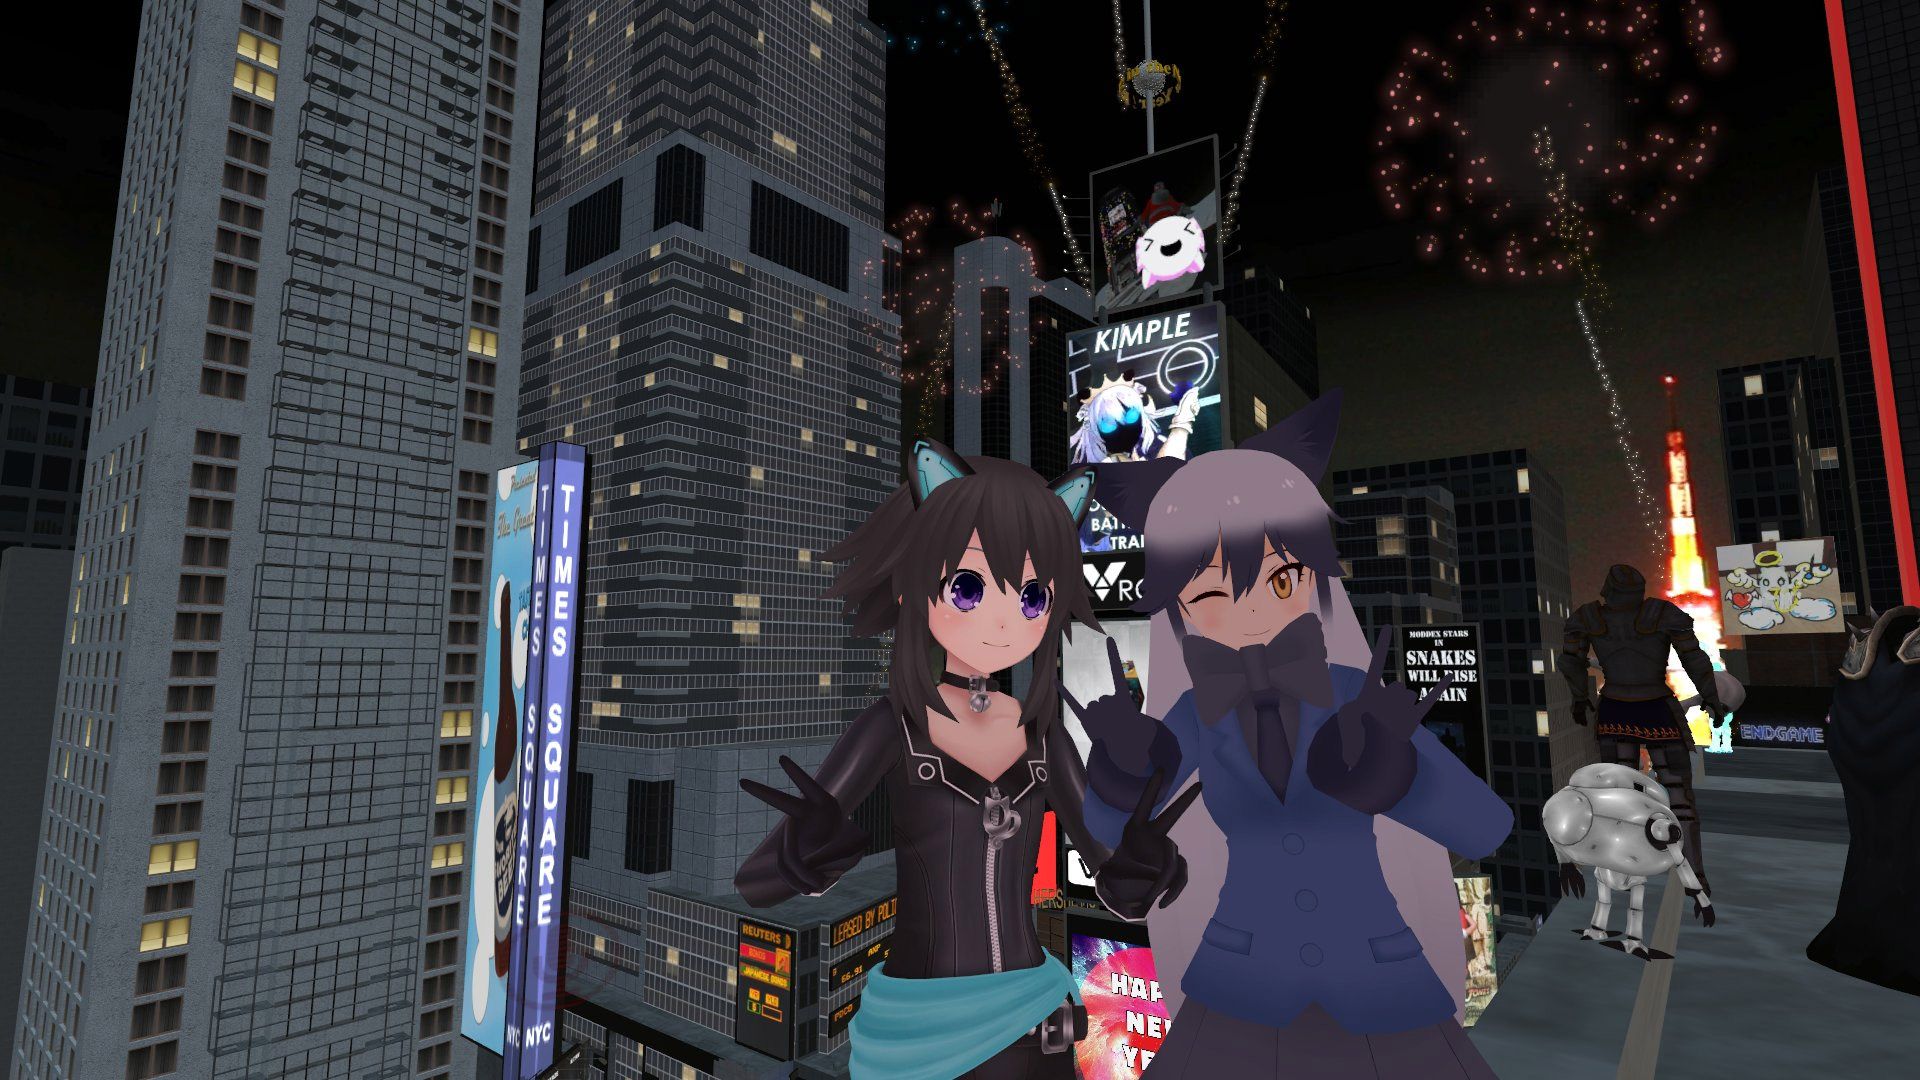 VRChat' Reaches 2 Million Installs, Doubling in the Last Ten Days